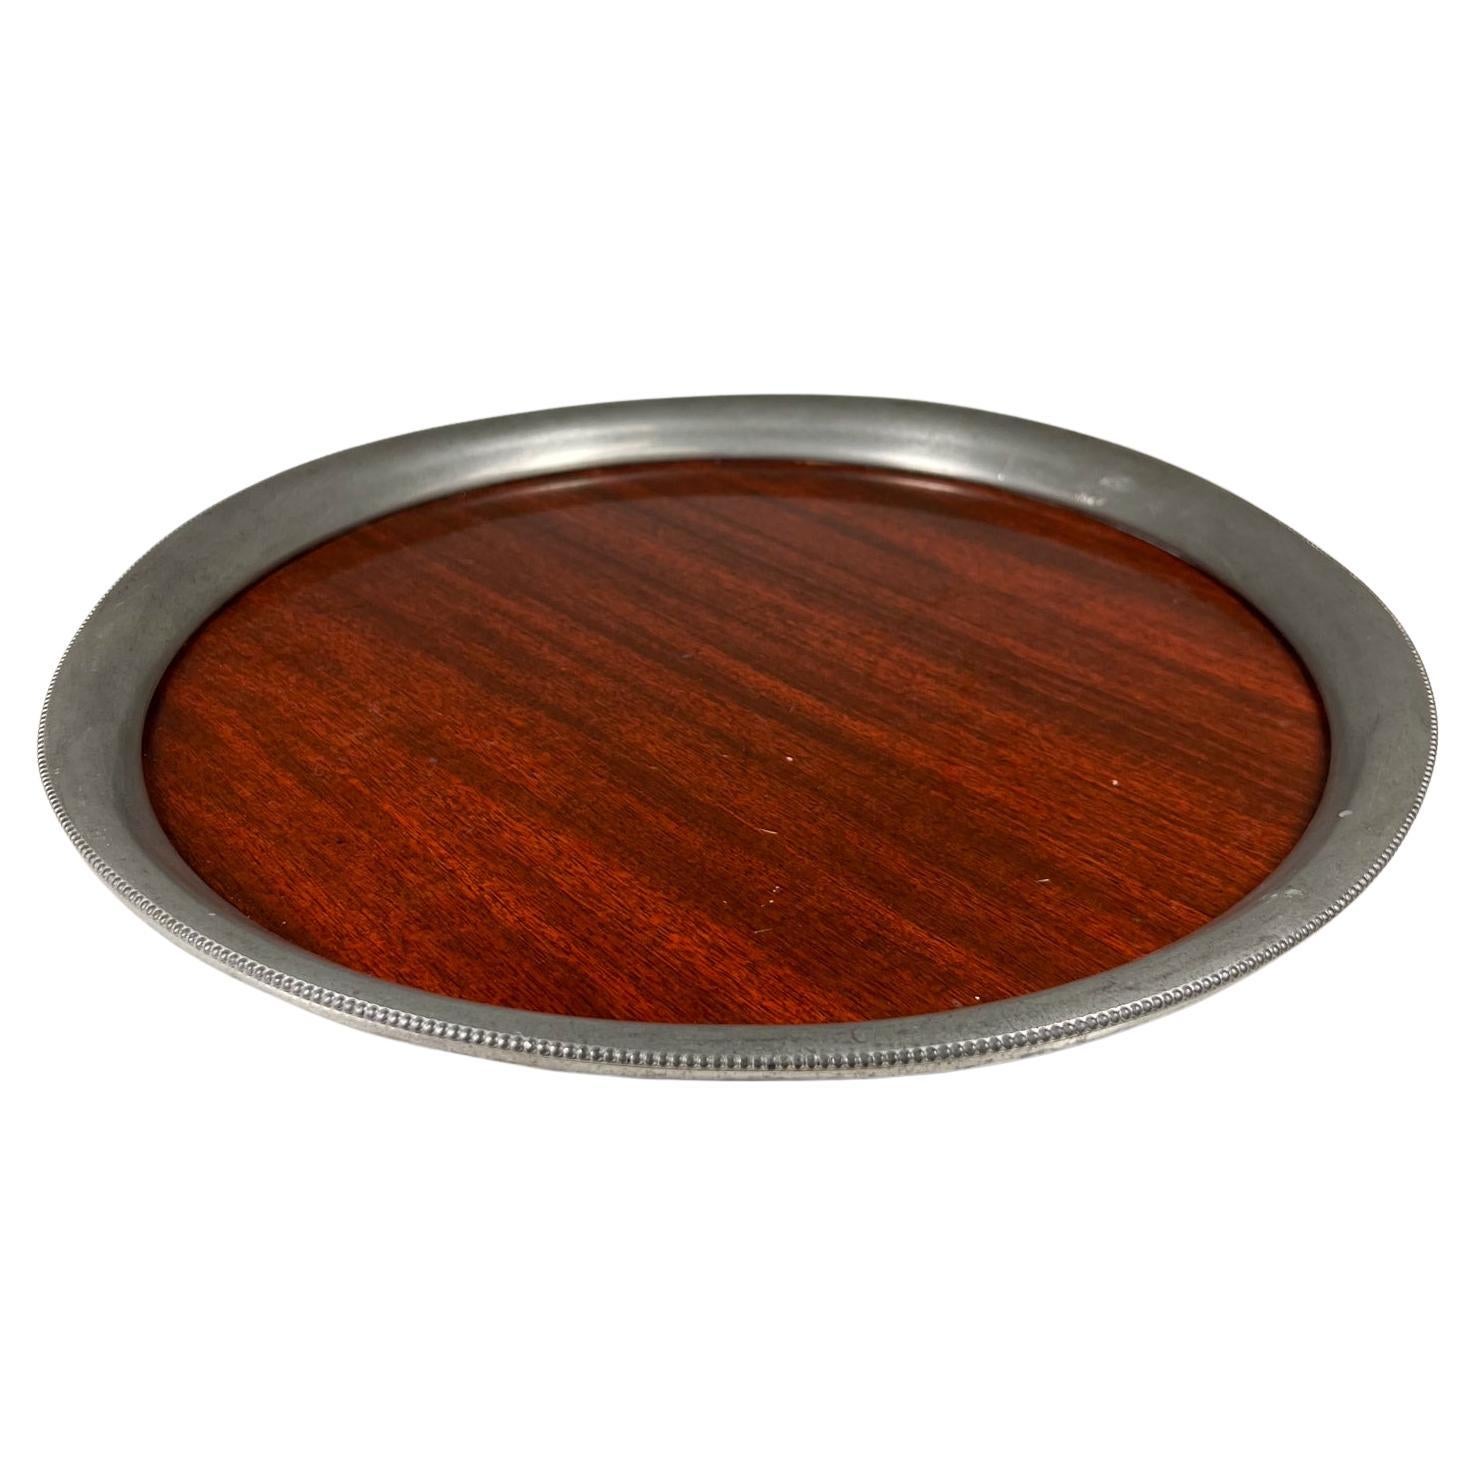 1970s Modern Vintage Revere Pewter Serving Tray Plate in Faux Wood